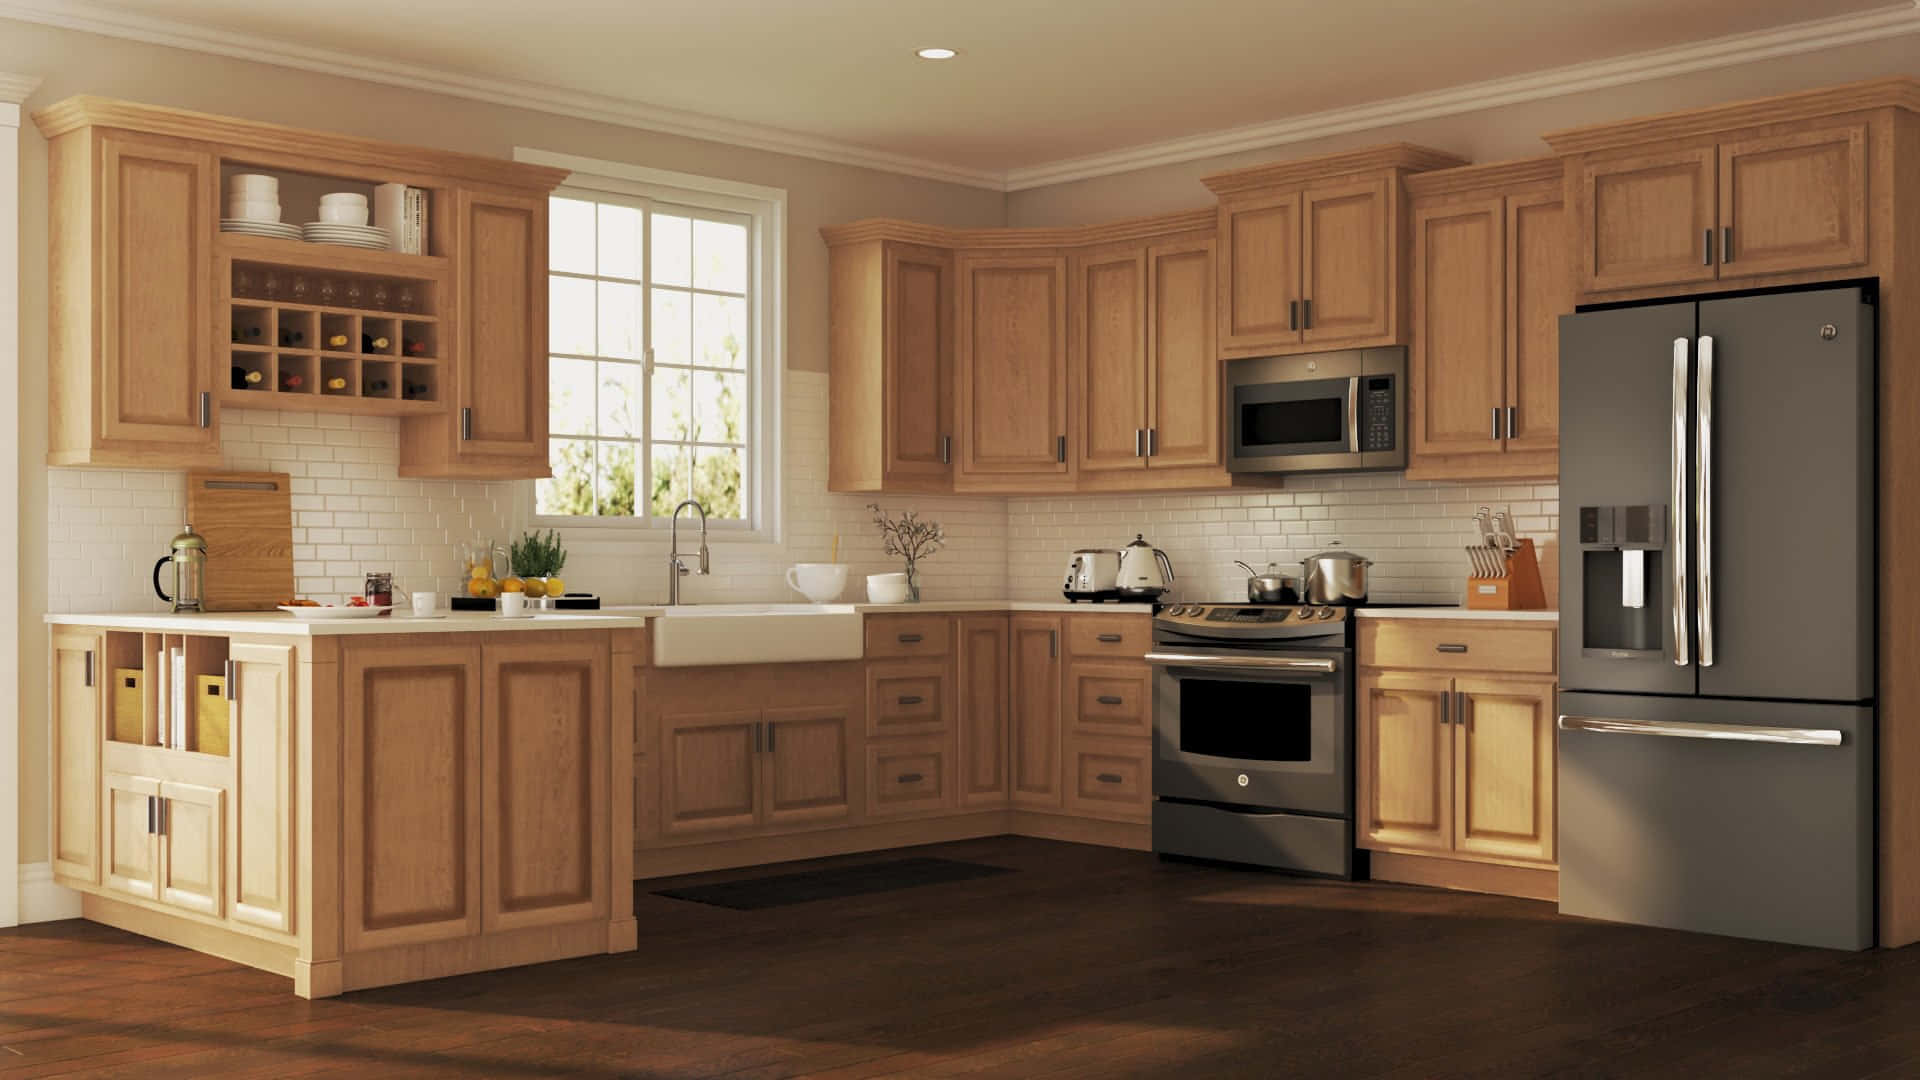 A Kitchen With Wood Cabinets And A Refrigerator